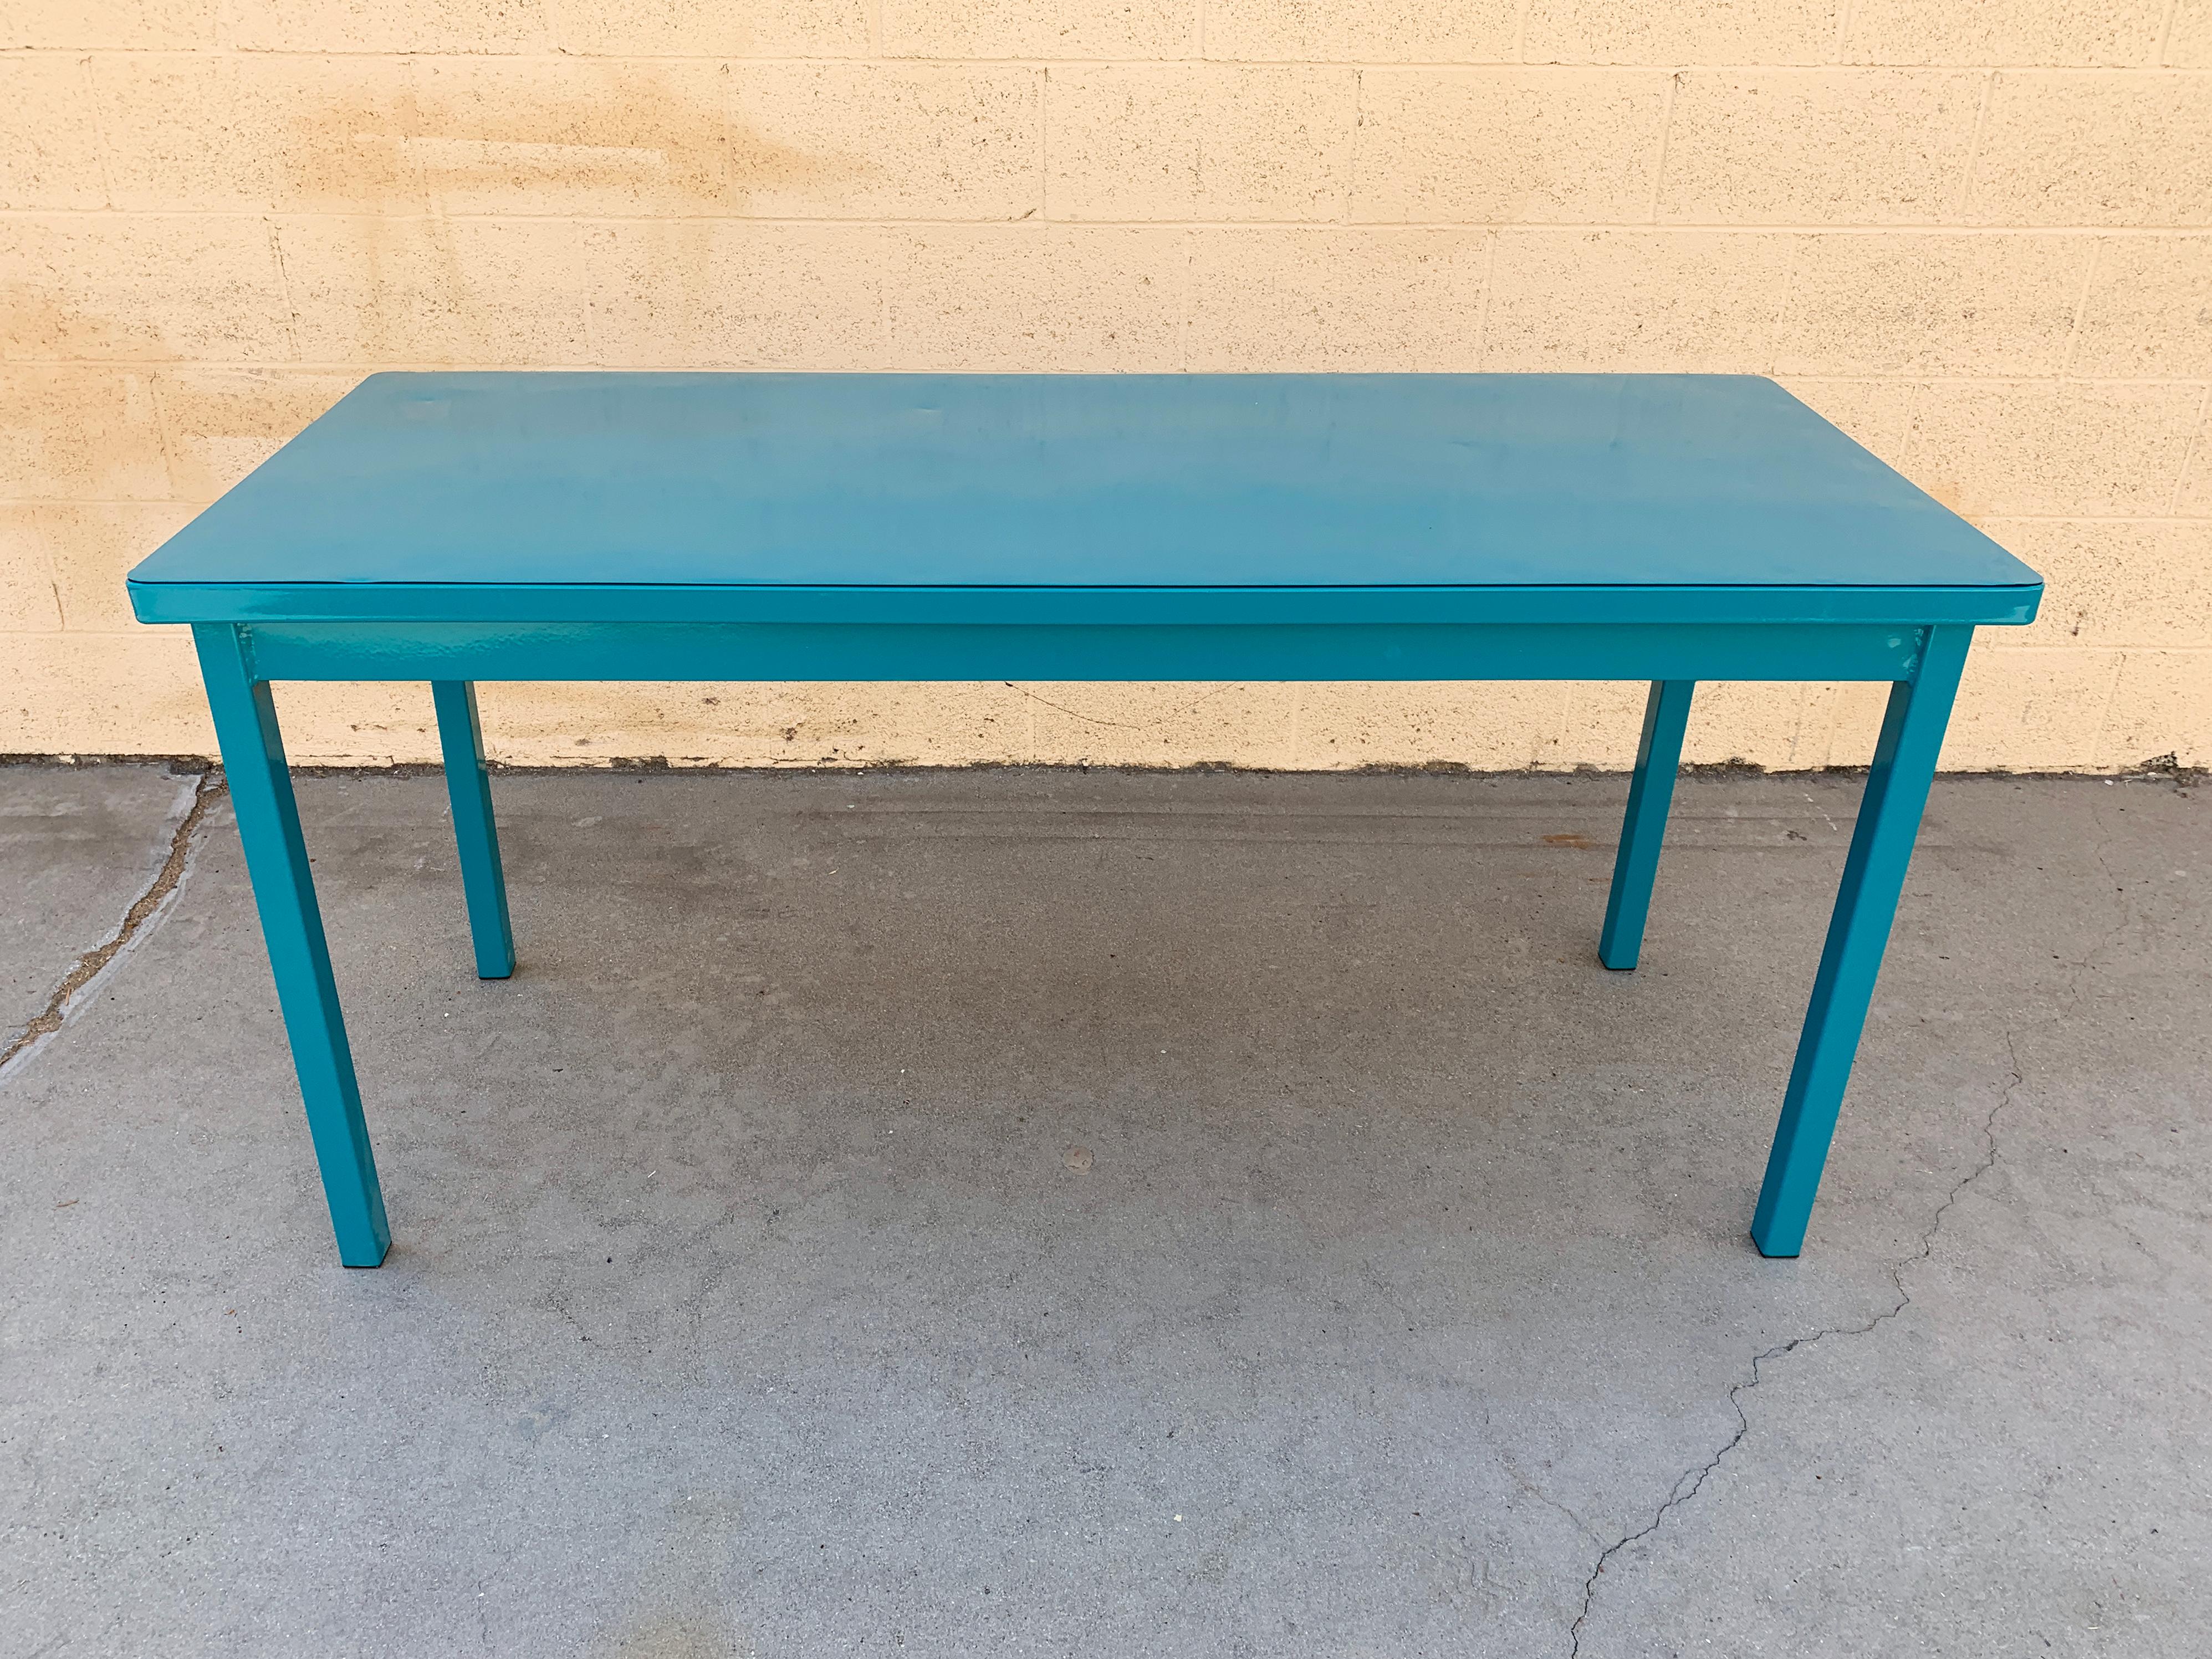 North American Midcentury Tanker Table in an Uncommon Size, Refinished in Teal For Sale